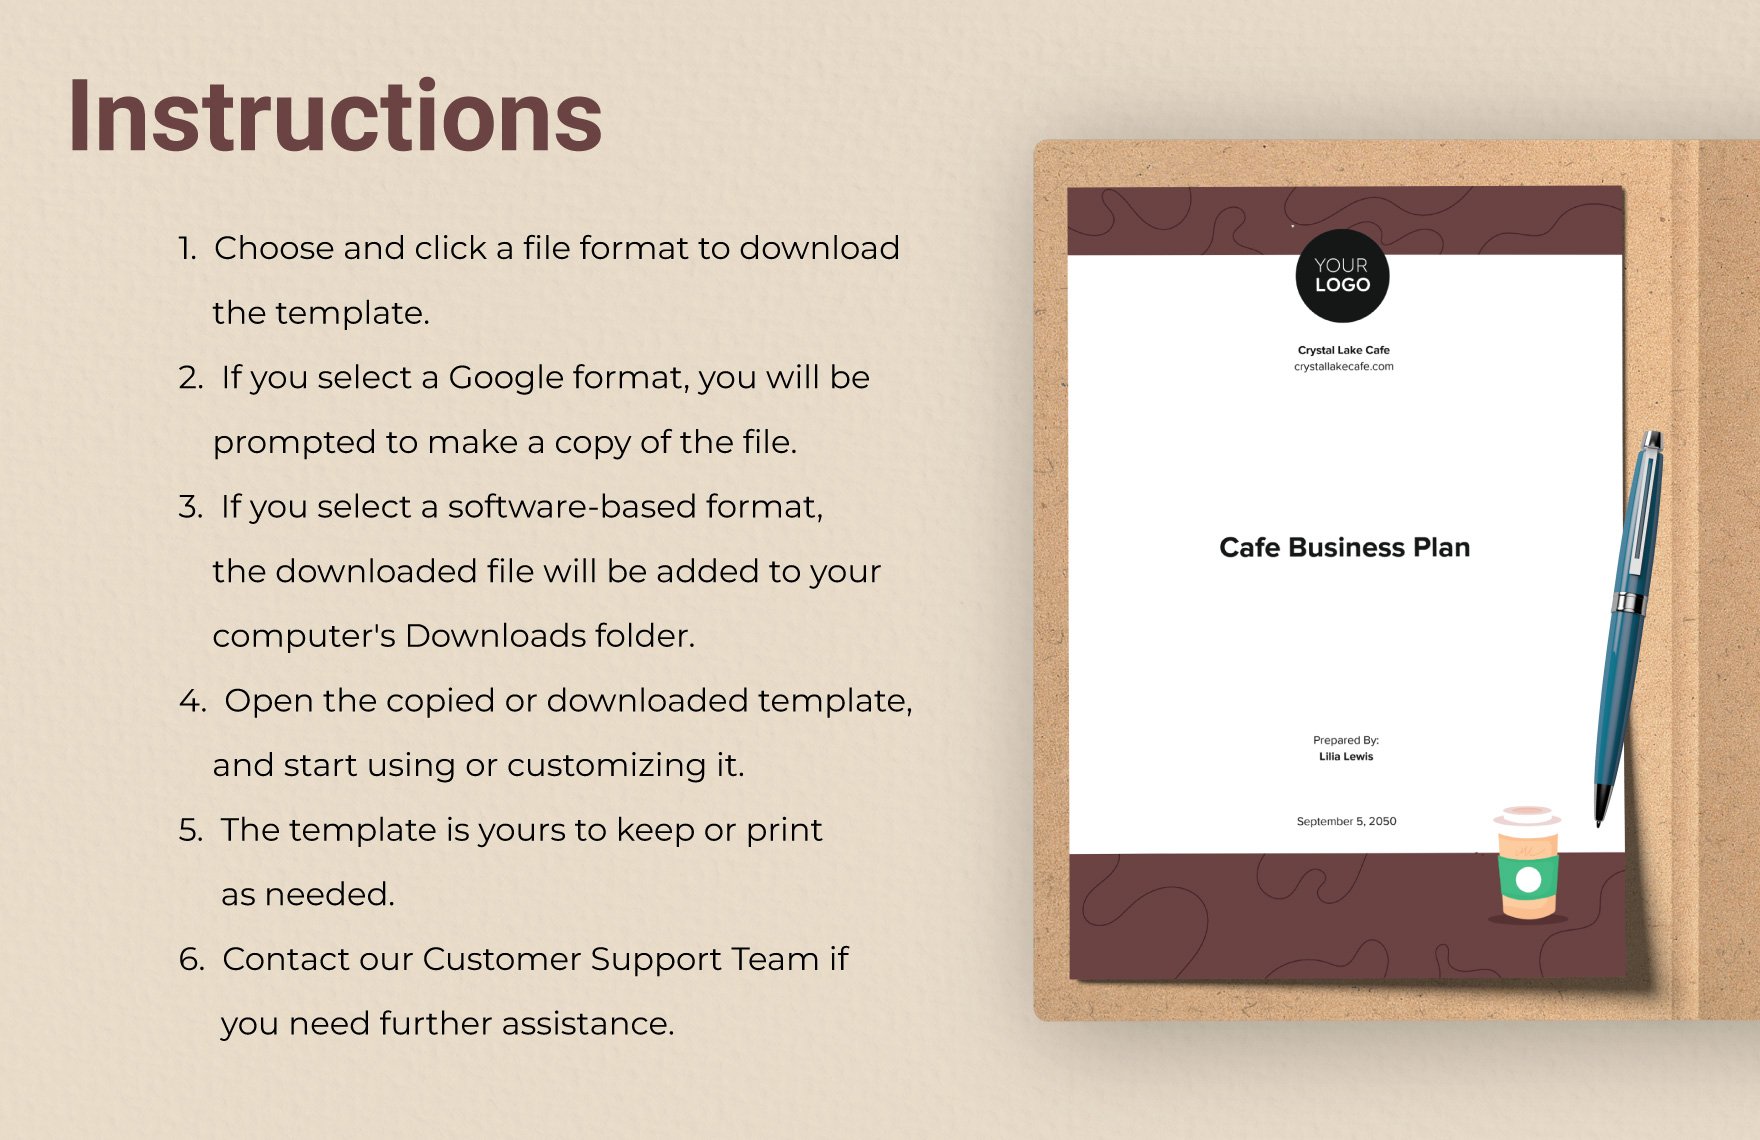 Cafe Business Plan Template